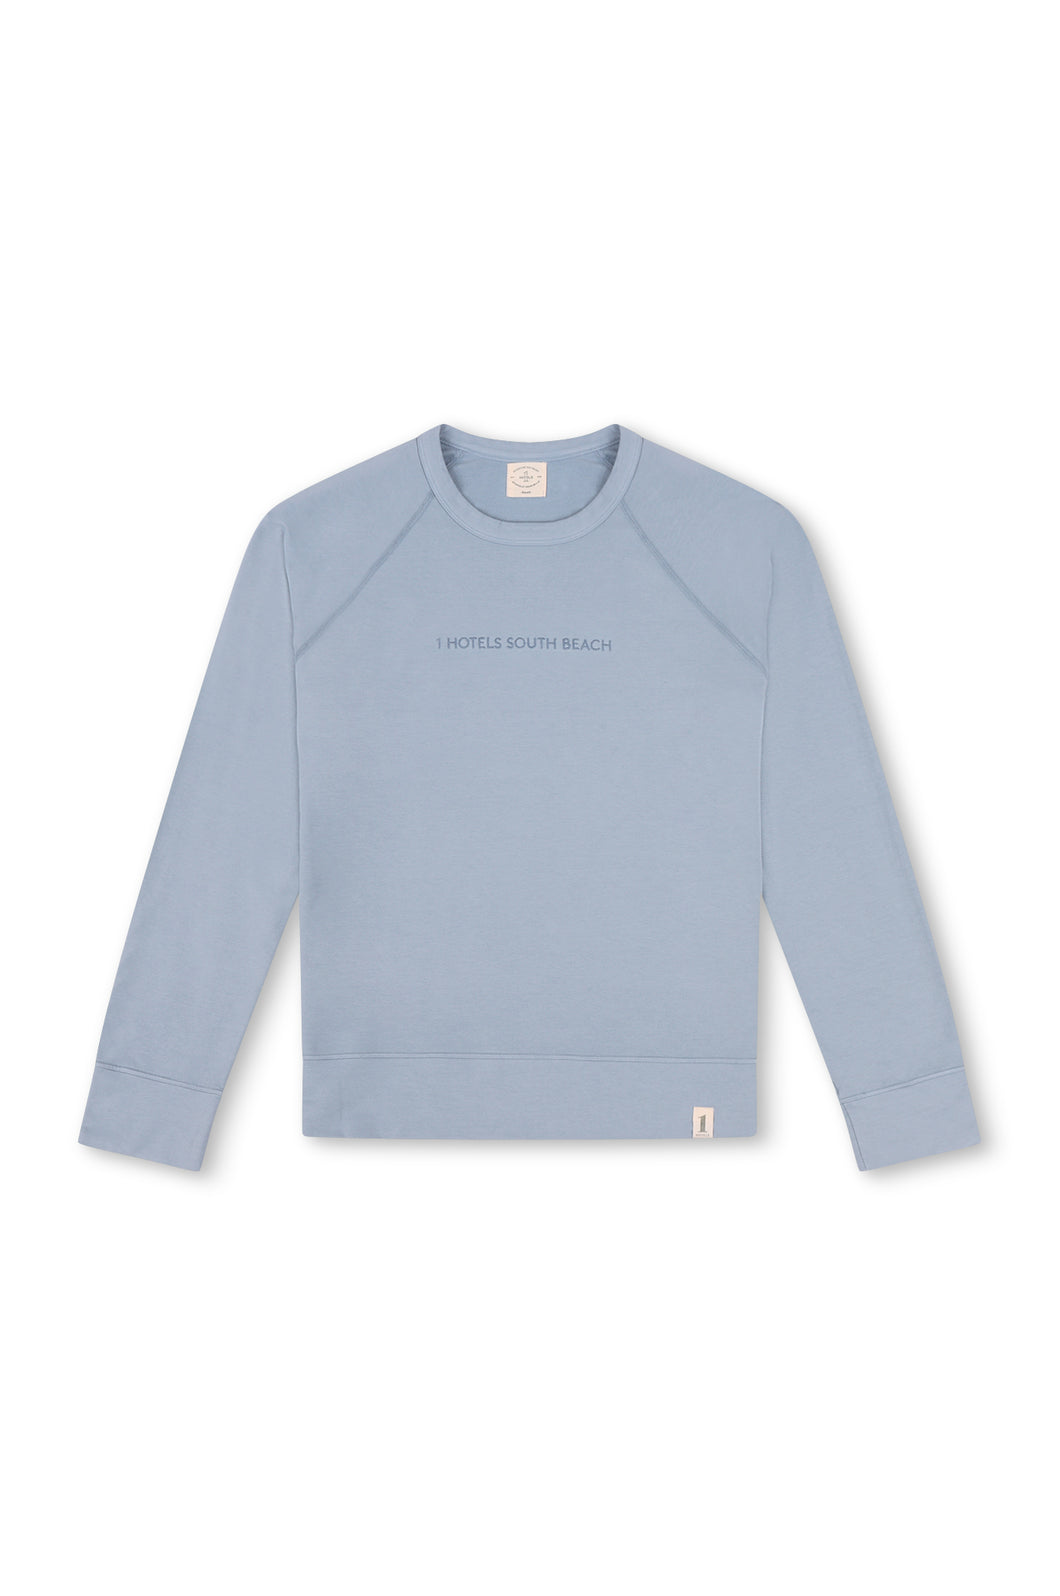 Lightweight Locations Collection Unisex Crewneck Pullover